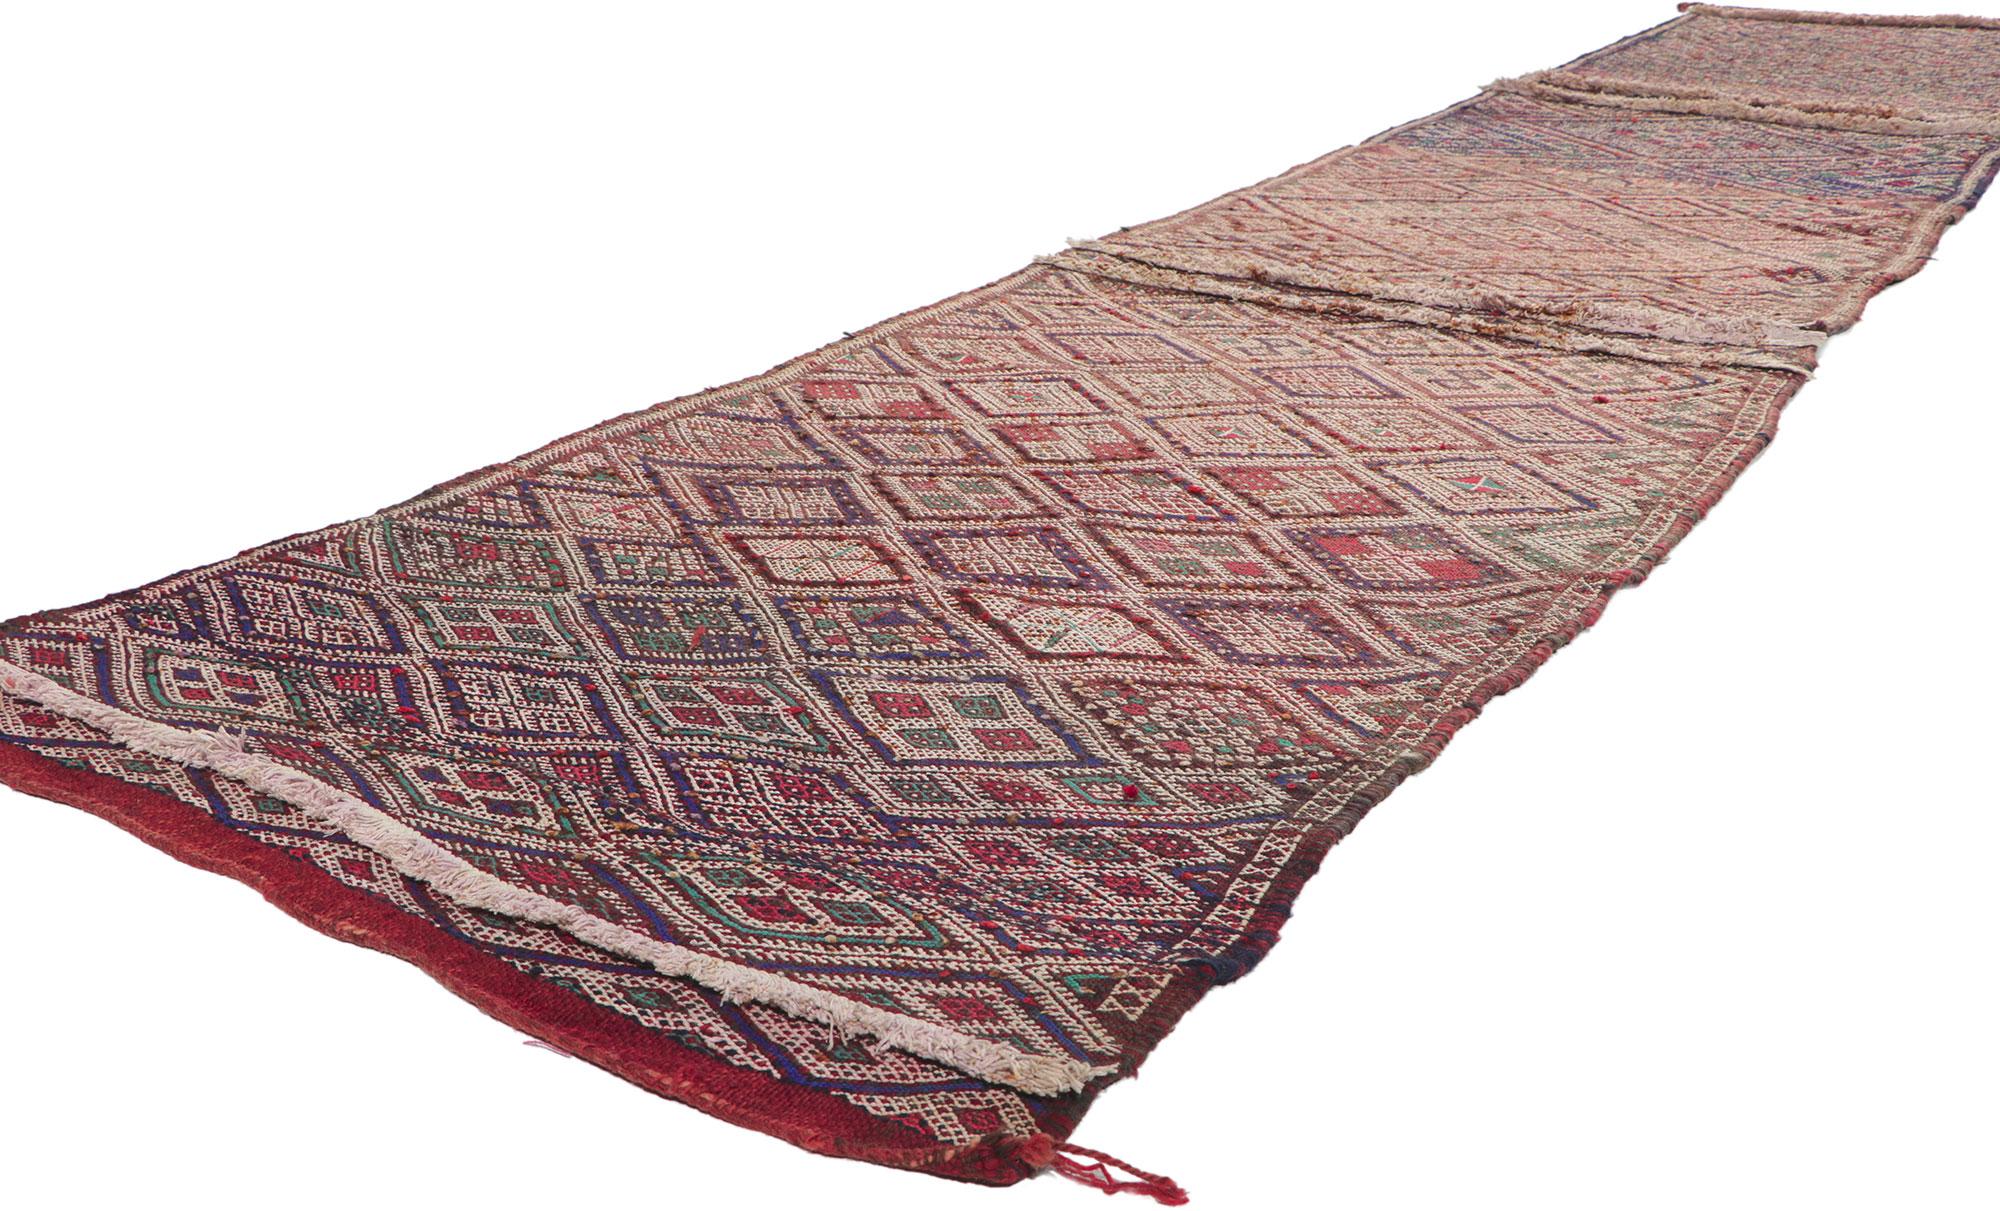 21712 Vintage Zemmour Moroccan Kilim Runner, 02'11 x 15'10. Full of tiny details and tribal style, this hand-woven wool vintage Zemmour Berber Moroccan kilim rug runner is a captivating vision of woven beauty. The abrashed field is composed of